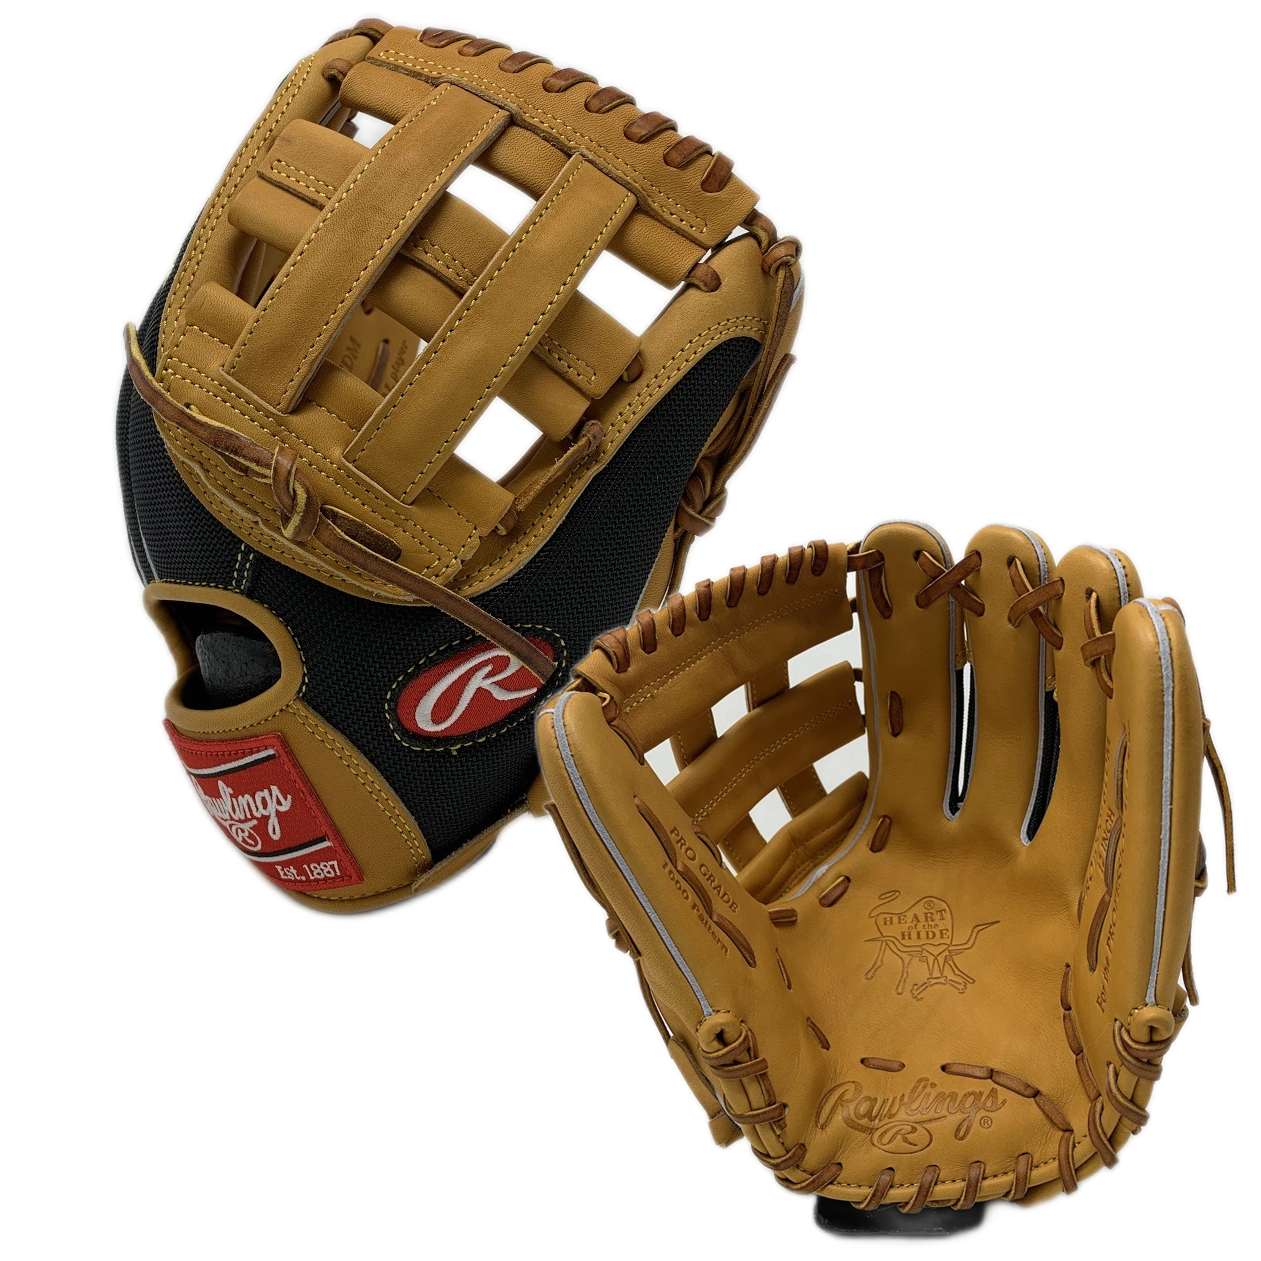 rawlings-heart-of-the-hide-12-inch-baseball-glove-1000-deco-mesh-pro-h-web-right-hand-throw PRO1000-6TDM-RightHandThrow Rawlings    When it comes to baseball gloves Rawlings is a name